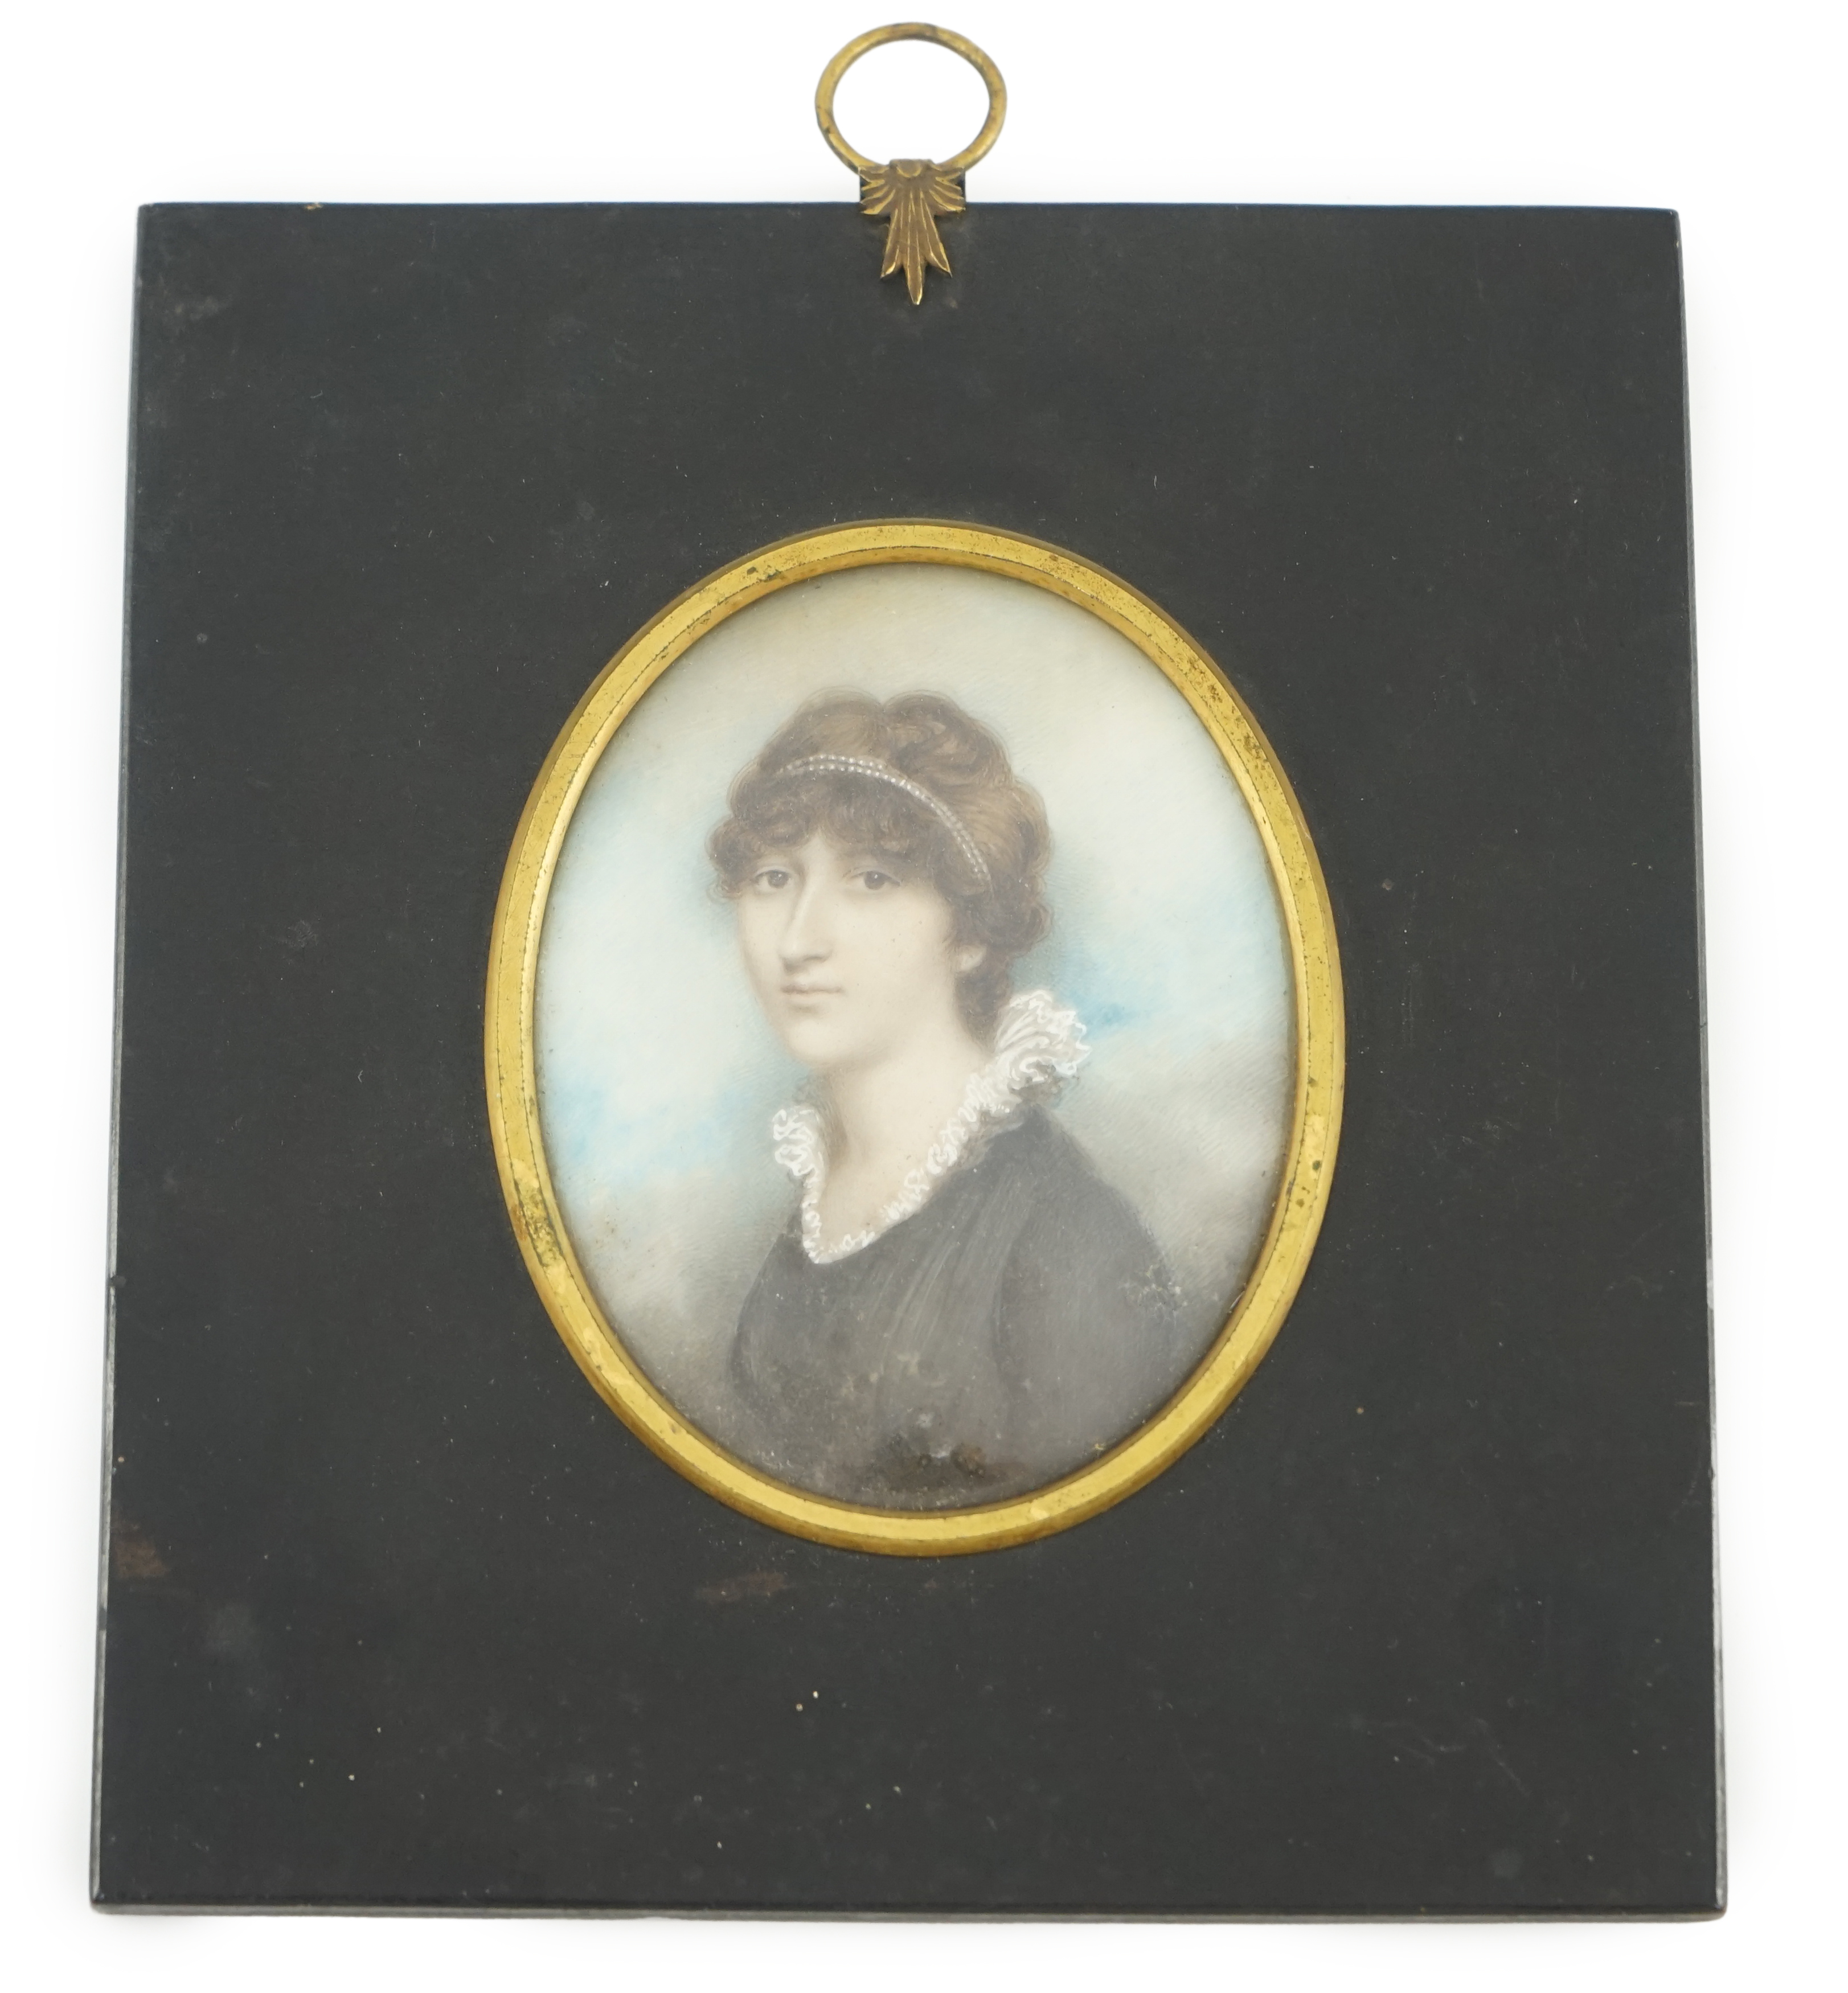 Andrew Plimer (1763-1837), Portrait miniature of a young lady, watercolour on ivory, 7.8 x 6cm. CITES Submission reference 8UB64CXM